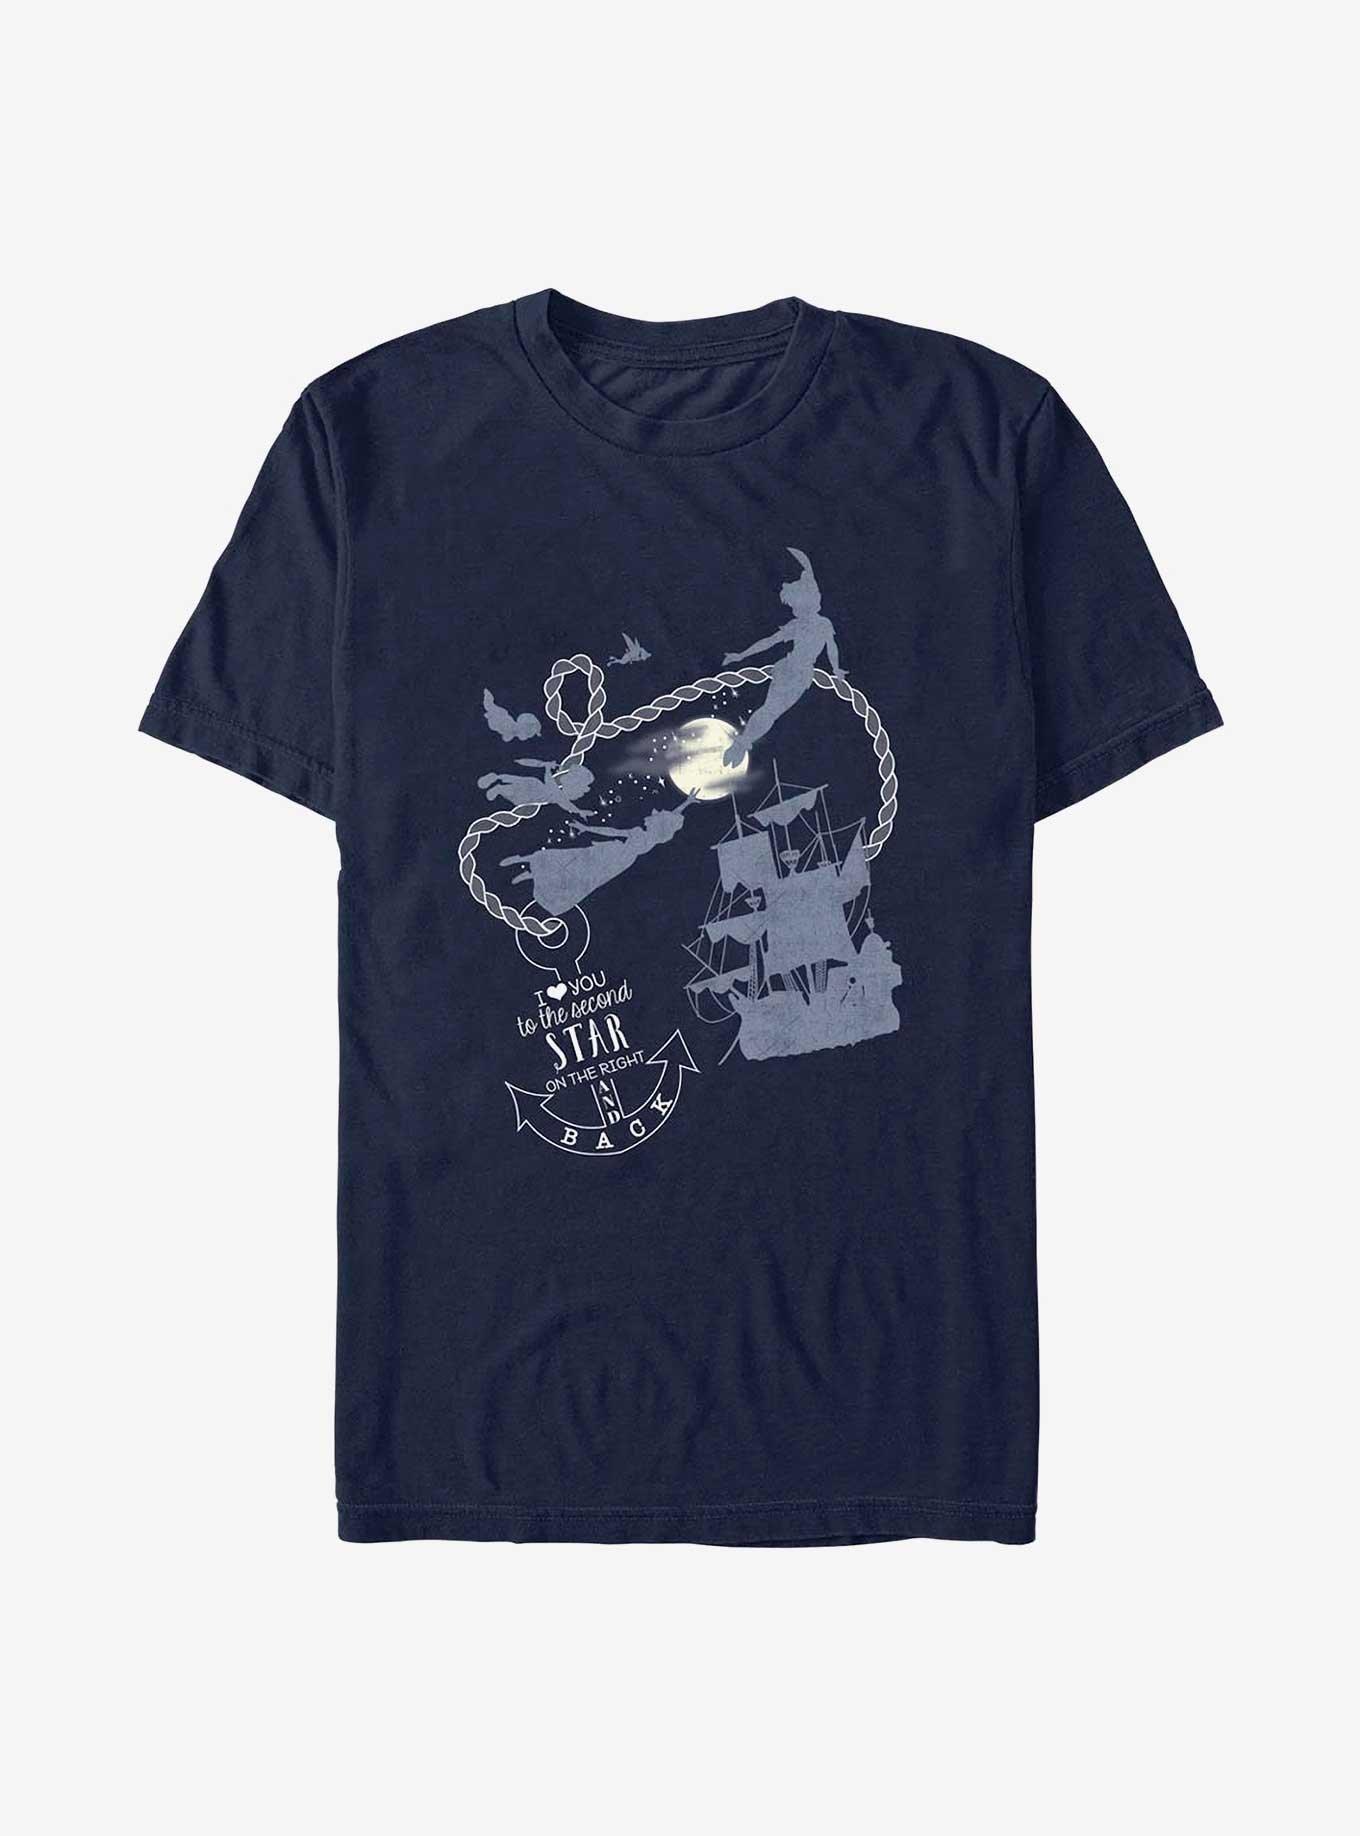 Disney Peter Pan Love You | The Second Star BoxLunch T-Shirt To - BLUE